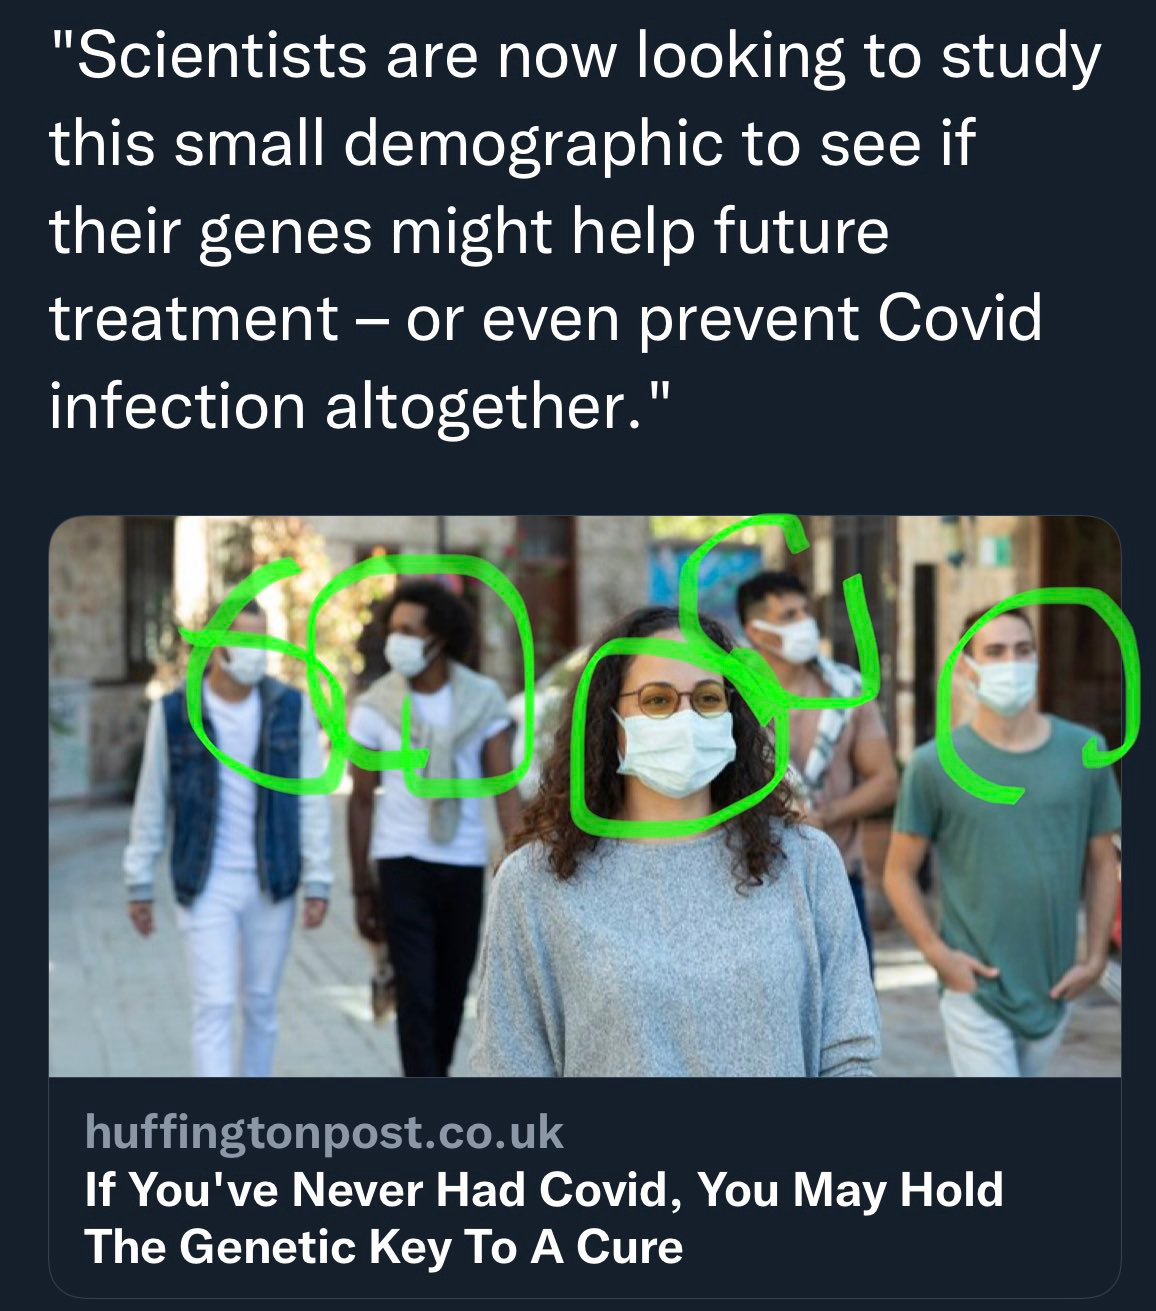 Text Scientists are now looking to study this small demographic to see if their genes might help future treatment - or even prevent covid infection altogether. Huffingtonpost UK headline If youve never had covid you may hold the genetic key to a cure. The photo is of people walking down the street wearing masks and someone used a green highlight marker to circle all the masks on peoples faces